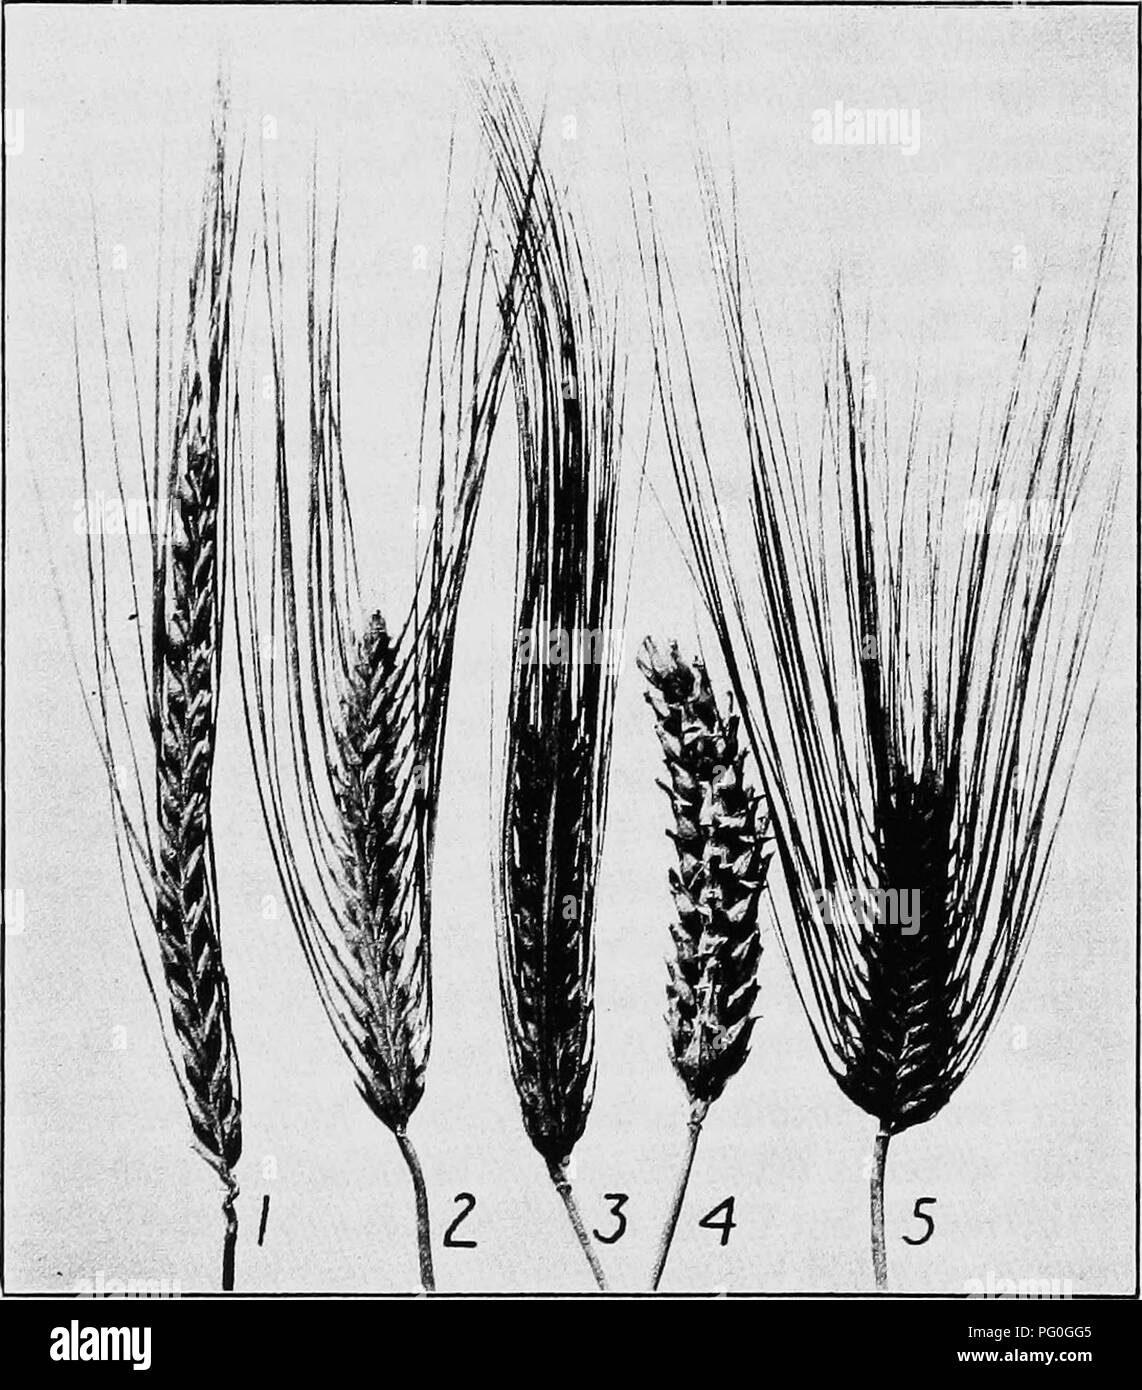 . The botany of crop plants : a text and reference book. Botany, Economic. 146 BOTANY OF CROP PLANTS I. Ilordeum dislichon zeocrilon (peacock or fan barley) (Fig. 53).—The spikes are very dense and short, about 6. Pig. 53.—Spikes of barleys, i, two-rowed nodding barley (Hordeum dis- tichon nutans); .i, medium barley (H. vulgare intermedium); 3, four-rowed barley (H. vulgare pallidum); 4, hooded barley (H. vulgare trifurcatum); 5, six-rowed barley (H. vulgare hexastichon). centimeters long, broad at the base and narrow at the tip, and with widely spreading beards. 2. Hordeum distichon nudum (tw Stock Photo